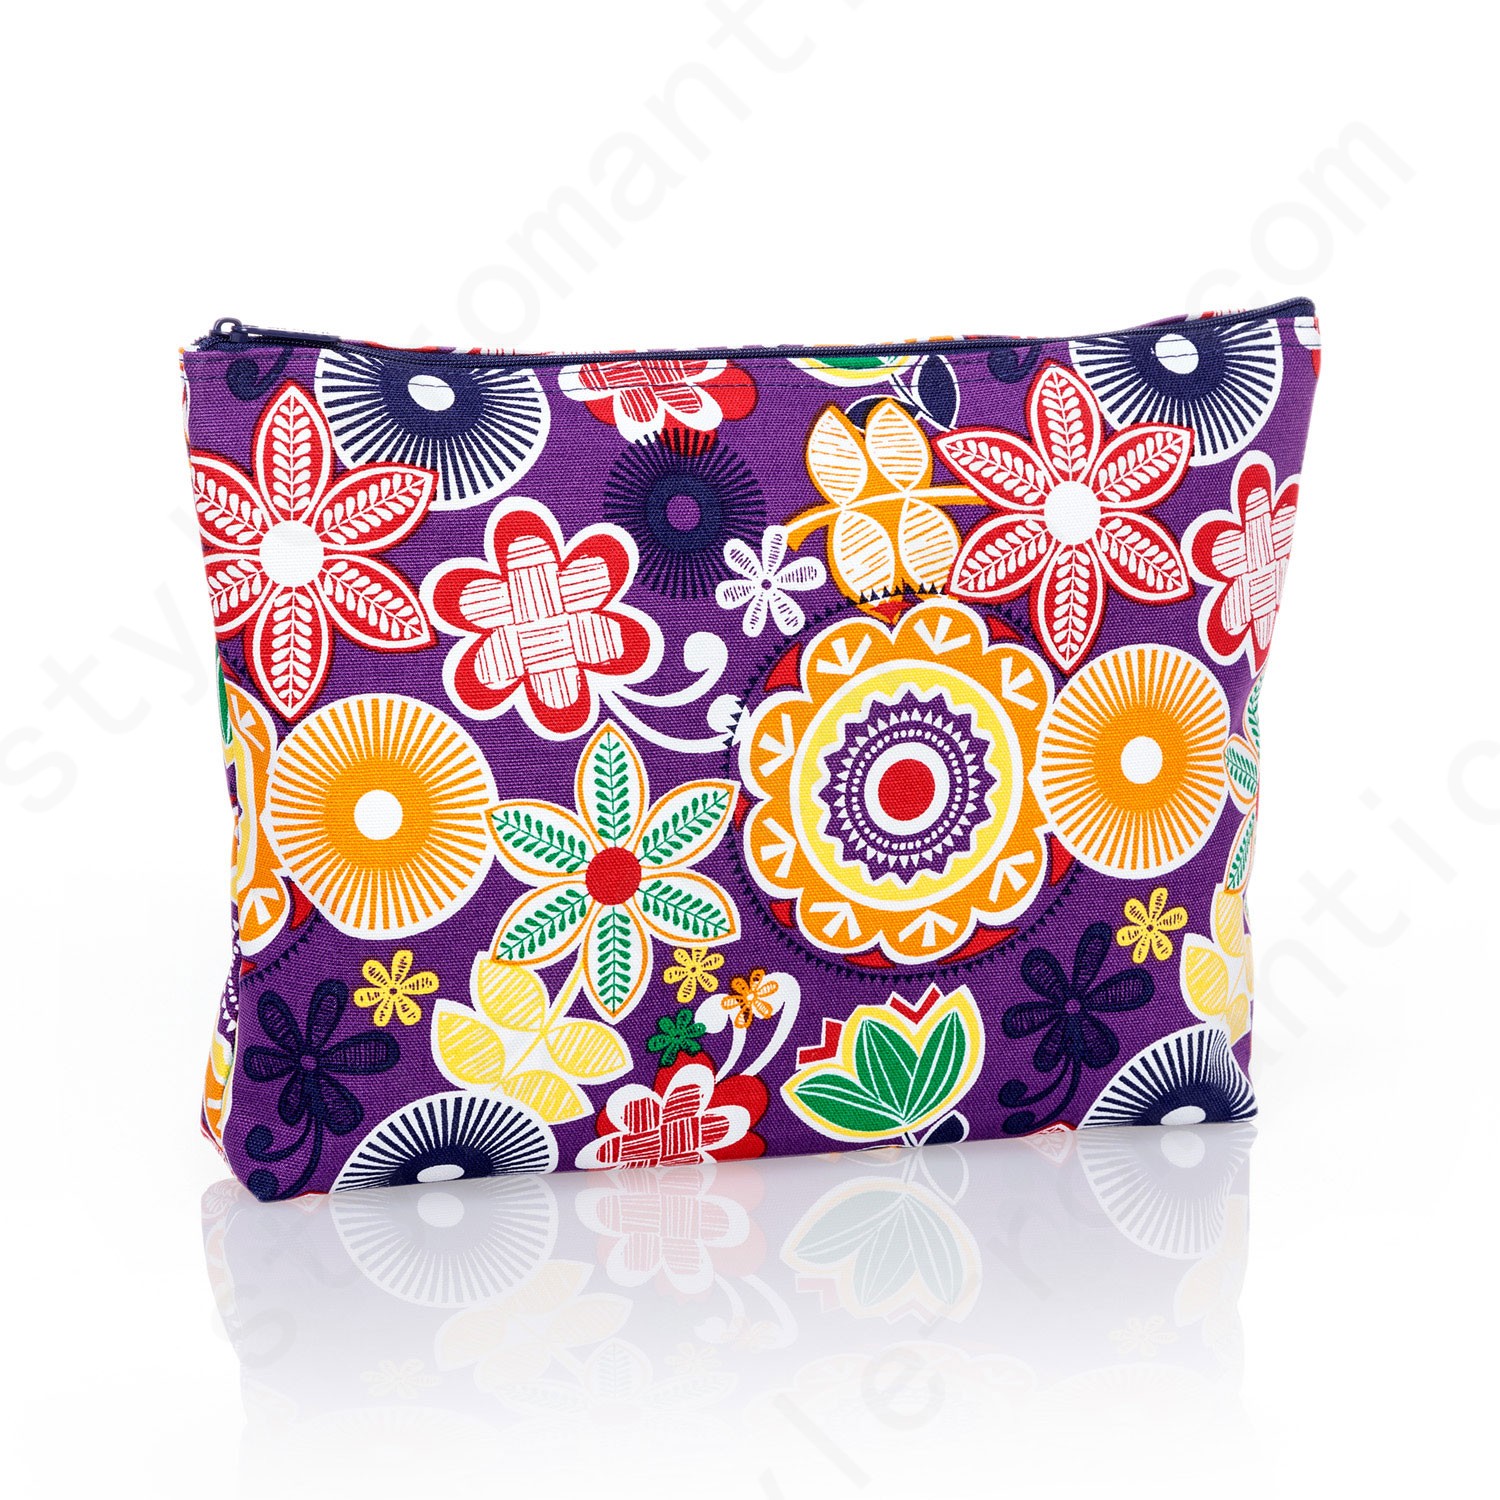 Thirty-One Gifts Zipper Pouch - Floral Fiesta Handbag Accessories - Thirty-One Gifts Zipper Pouch - Floral Fiesta Handbag Accessories